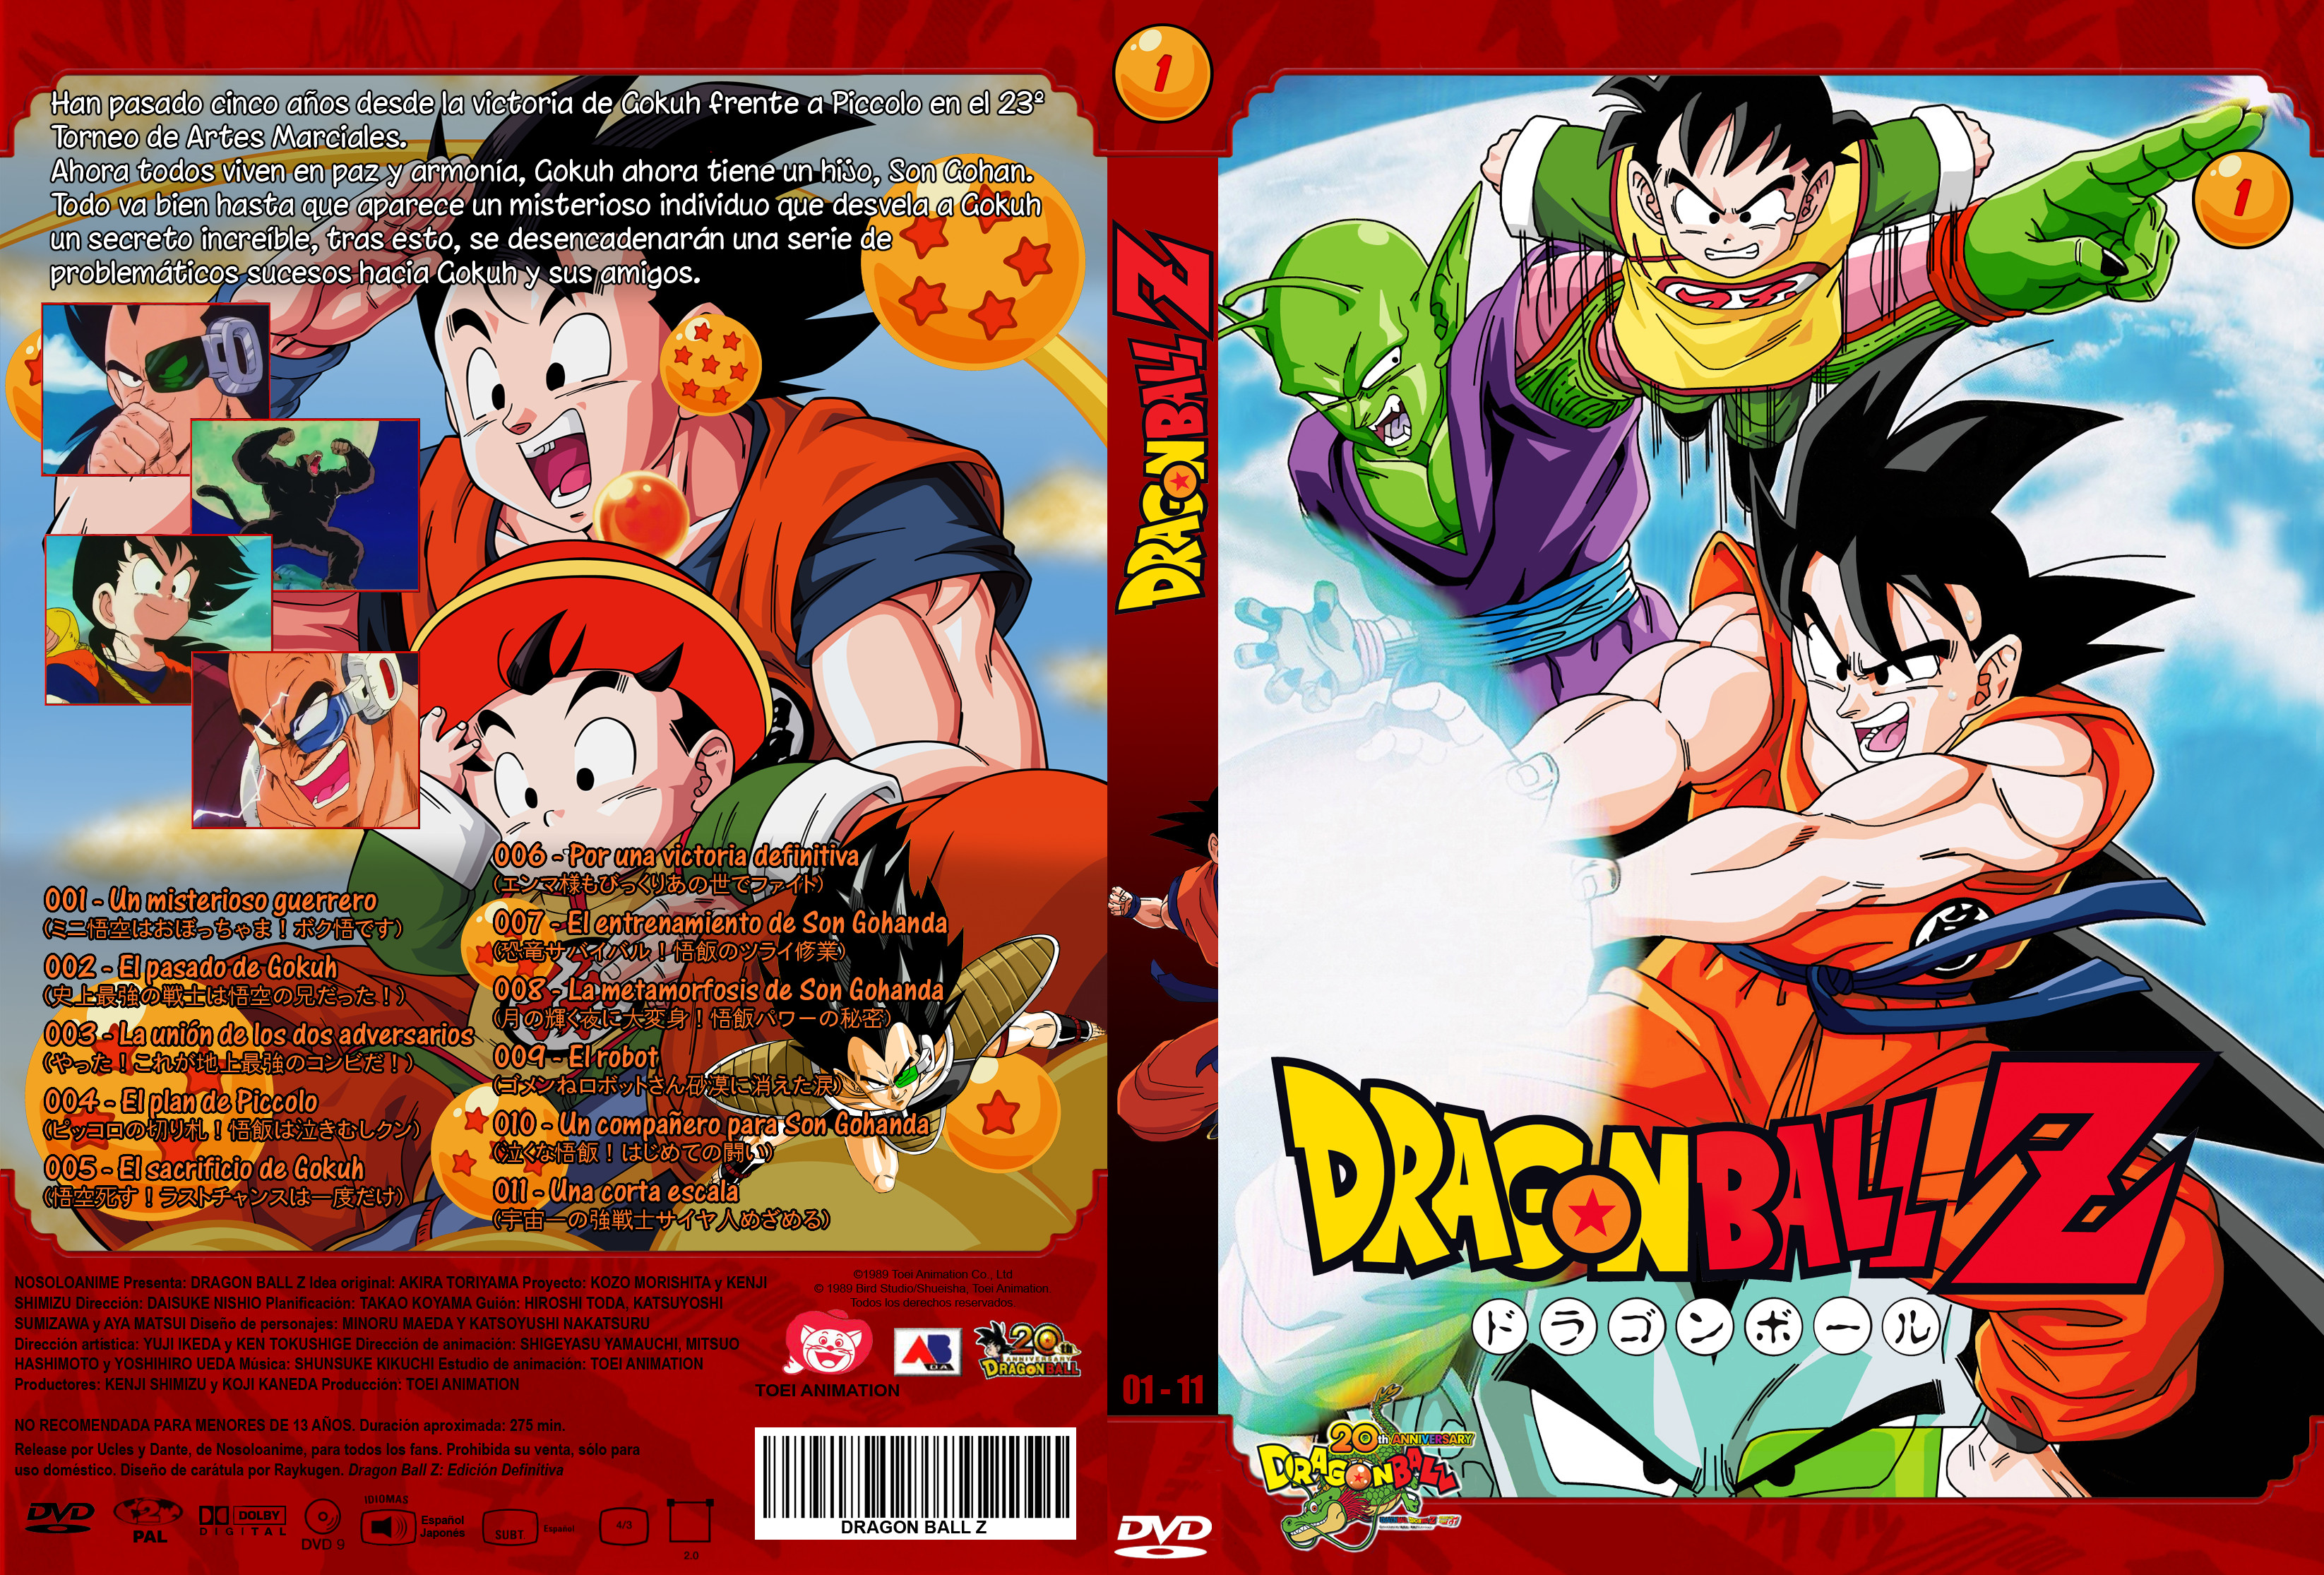 Dragon Ball Z cover 01 by Raykugen on DeviantArt